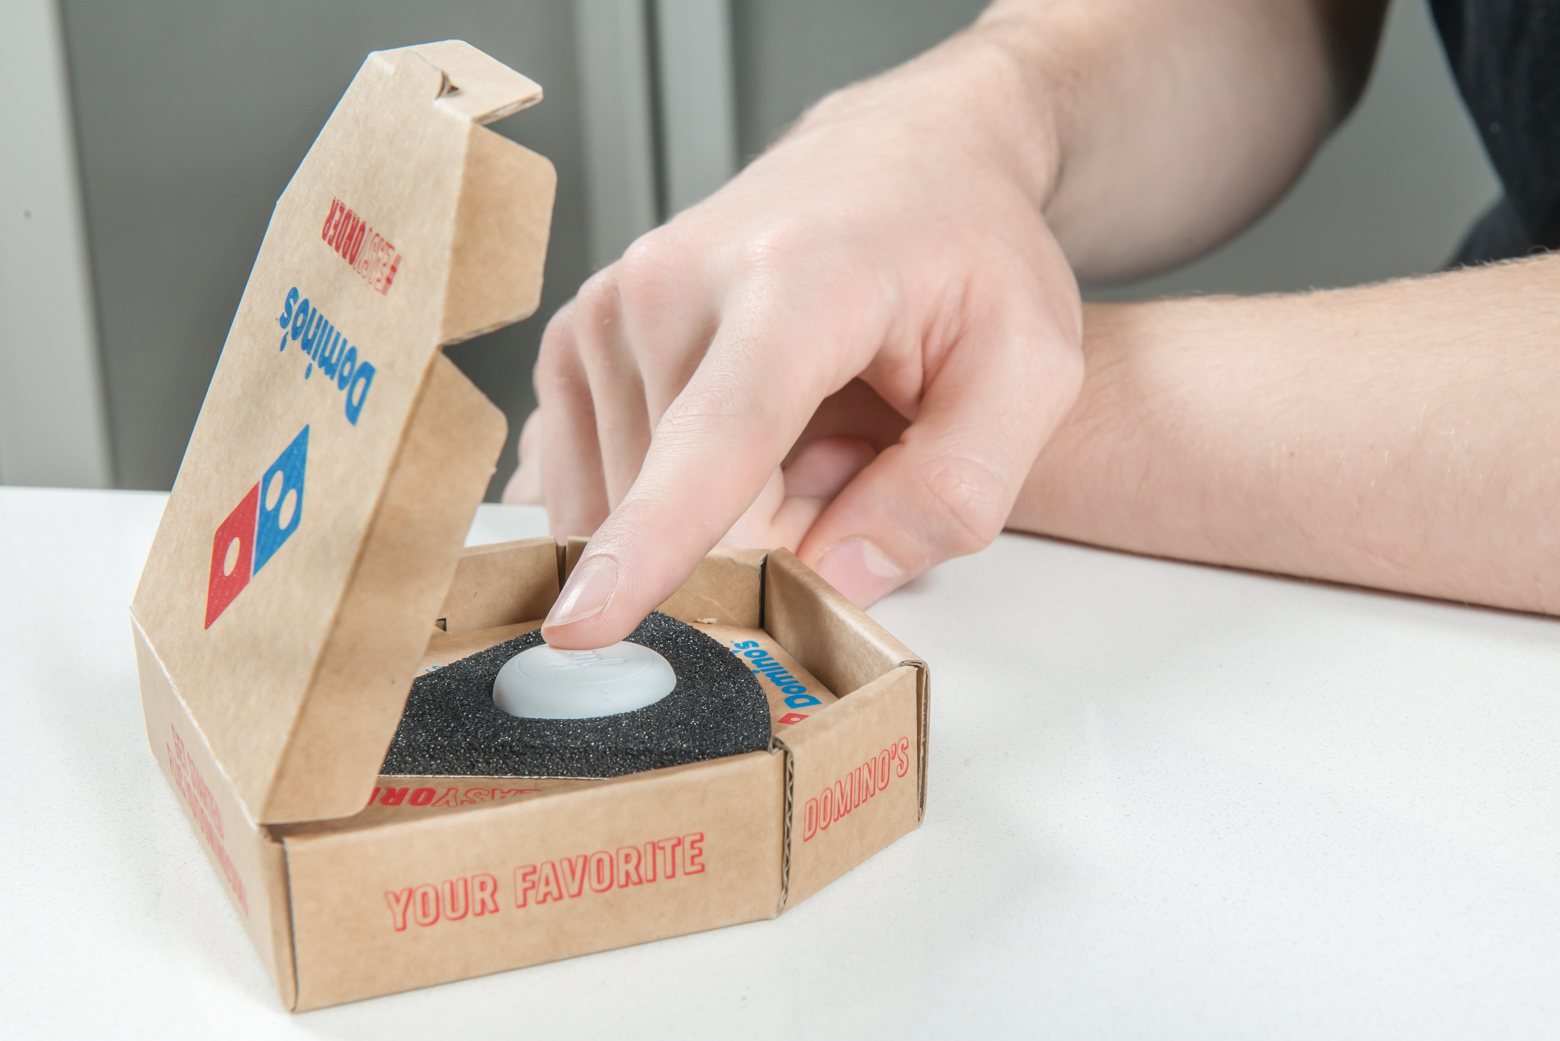 Domino's makes ordering pizza dangerous with 'Easy Order' button